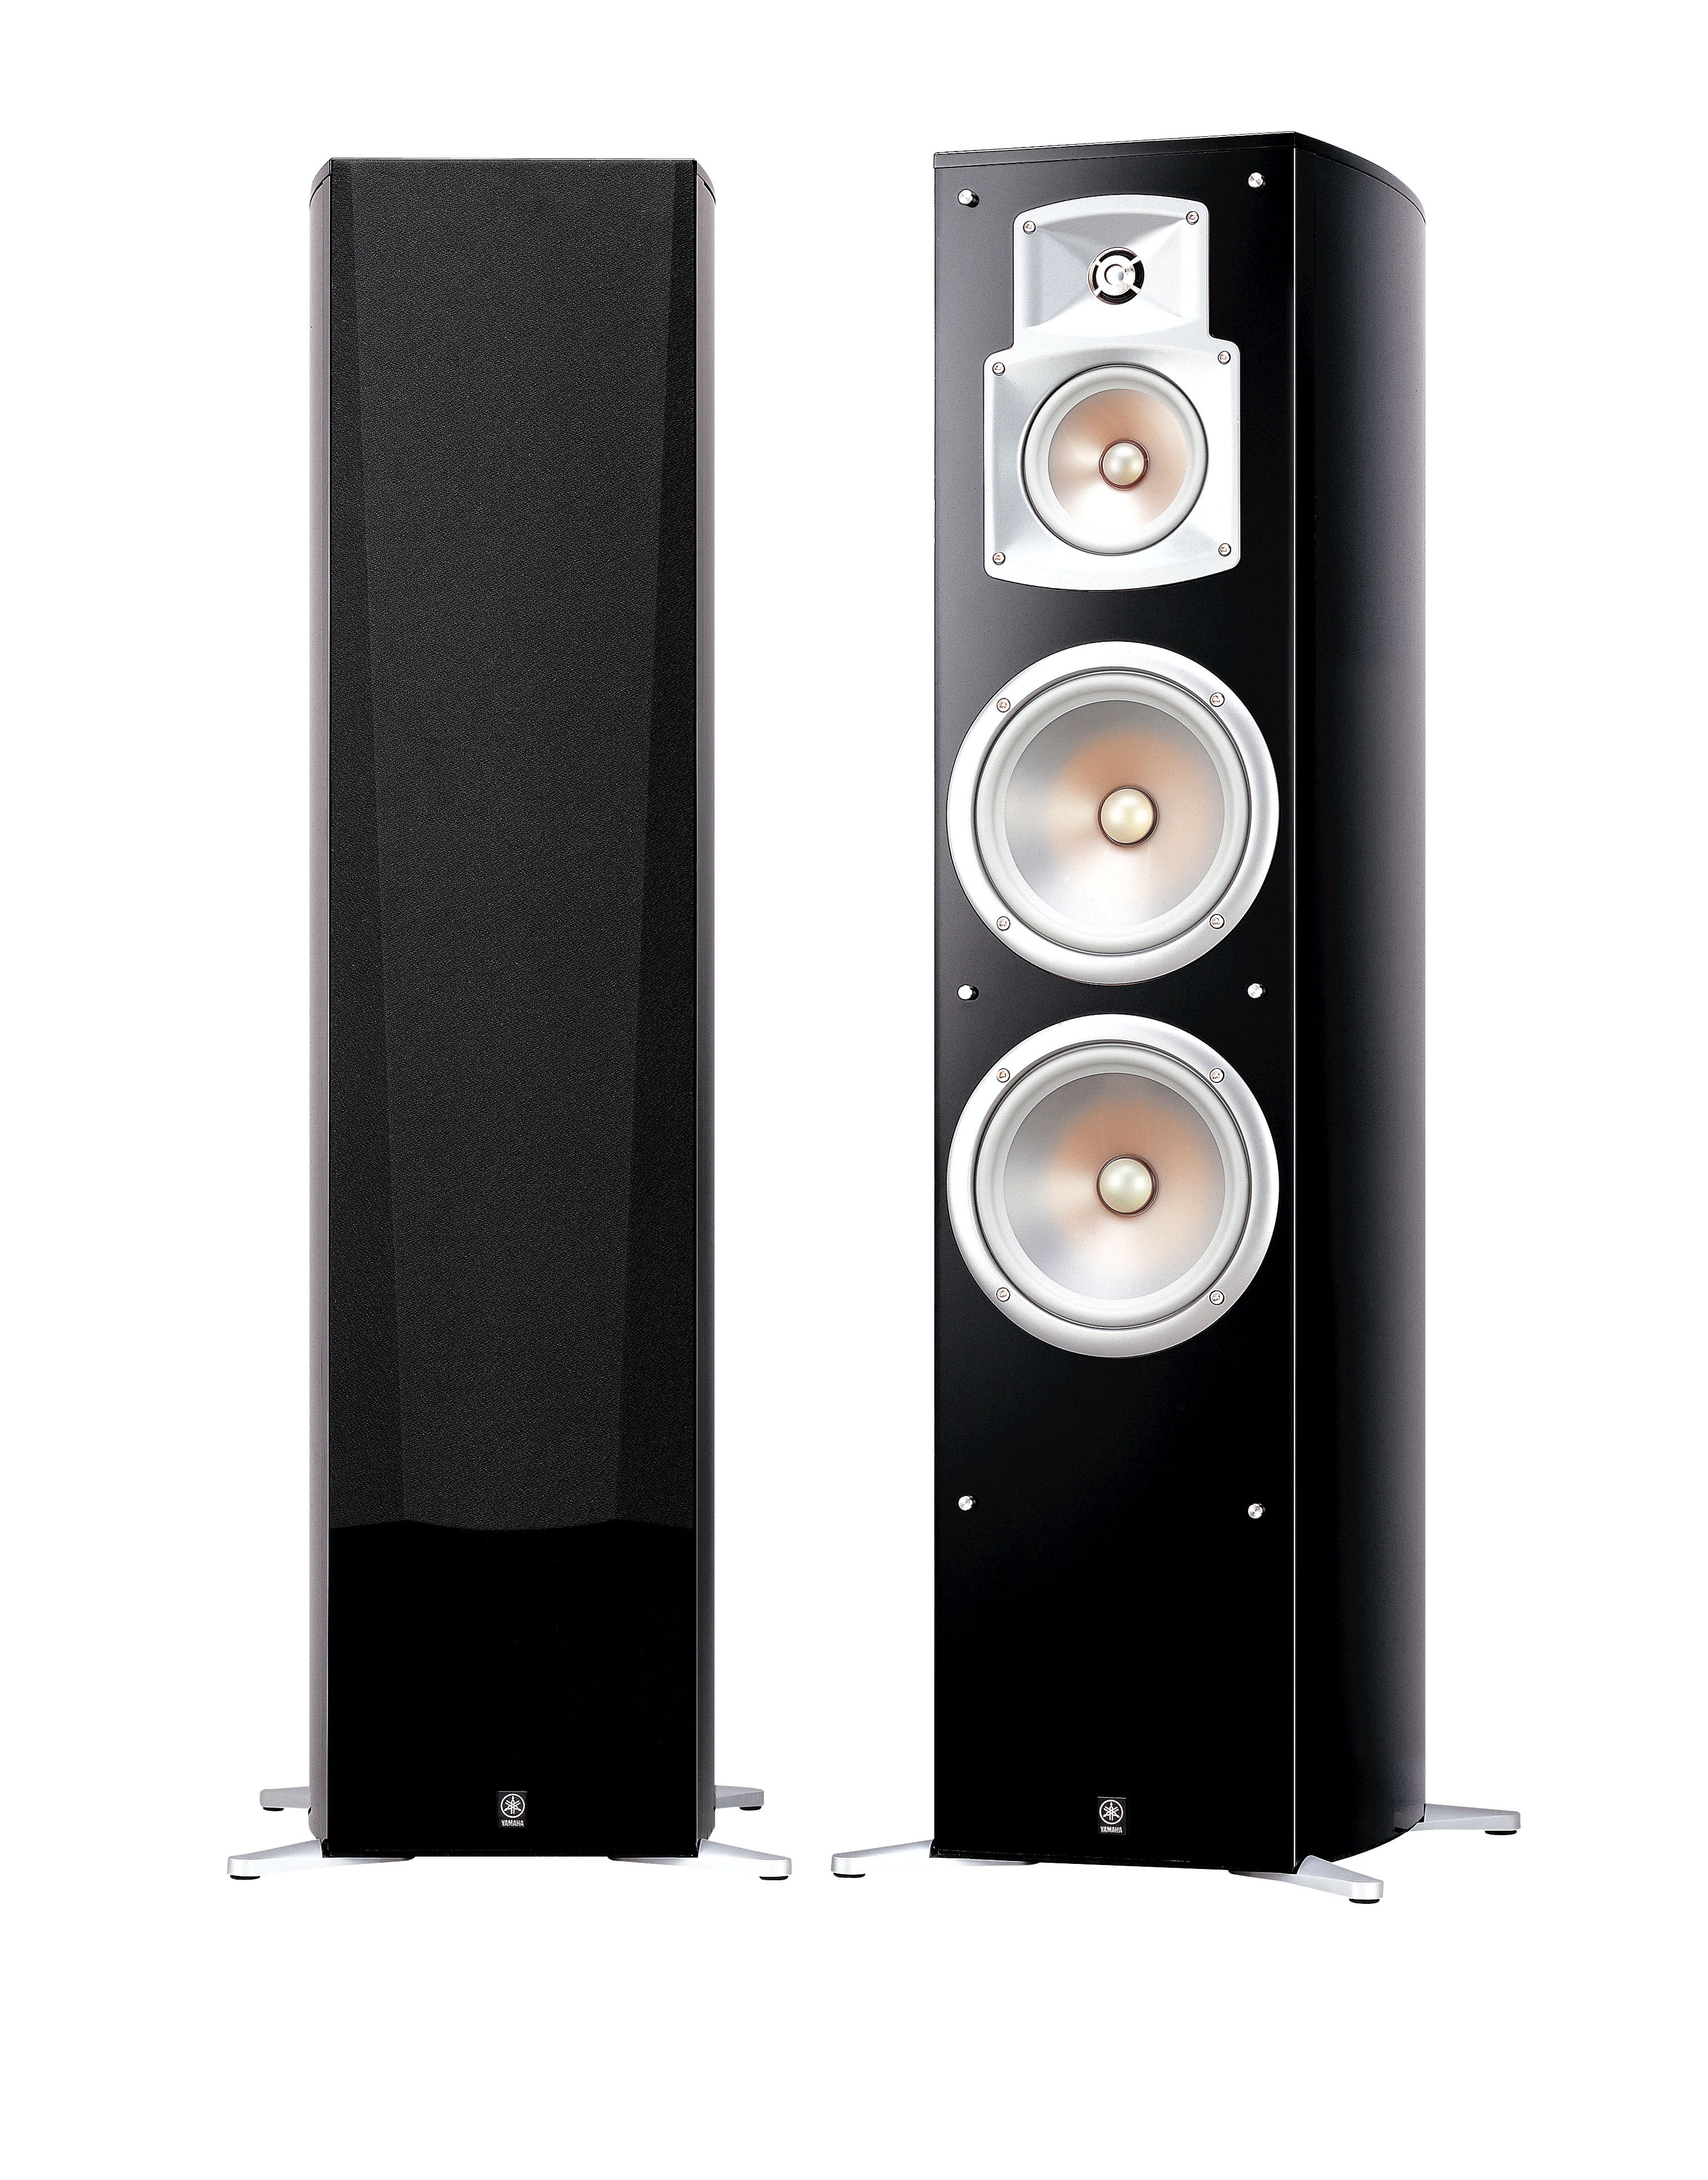 NS-777 - Overview - Speaker Systems - Audio & Visual ... home theater wiring speakers in series 